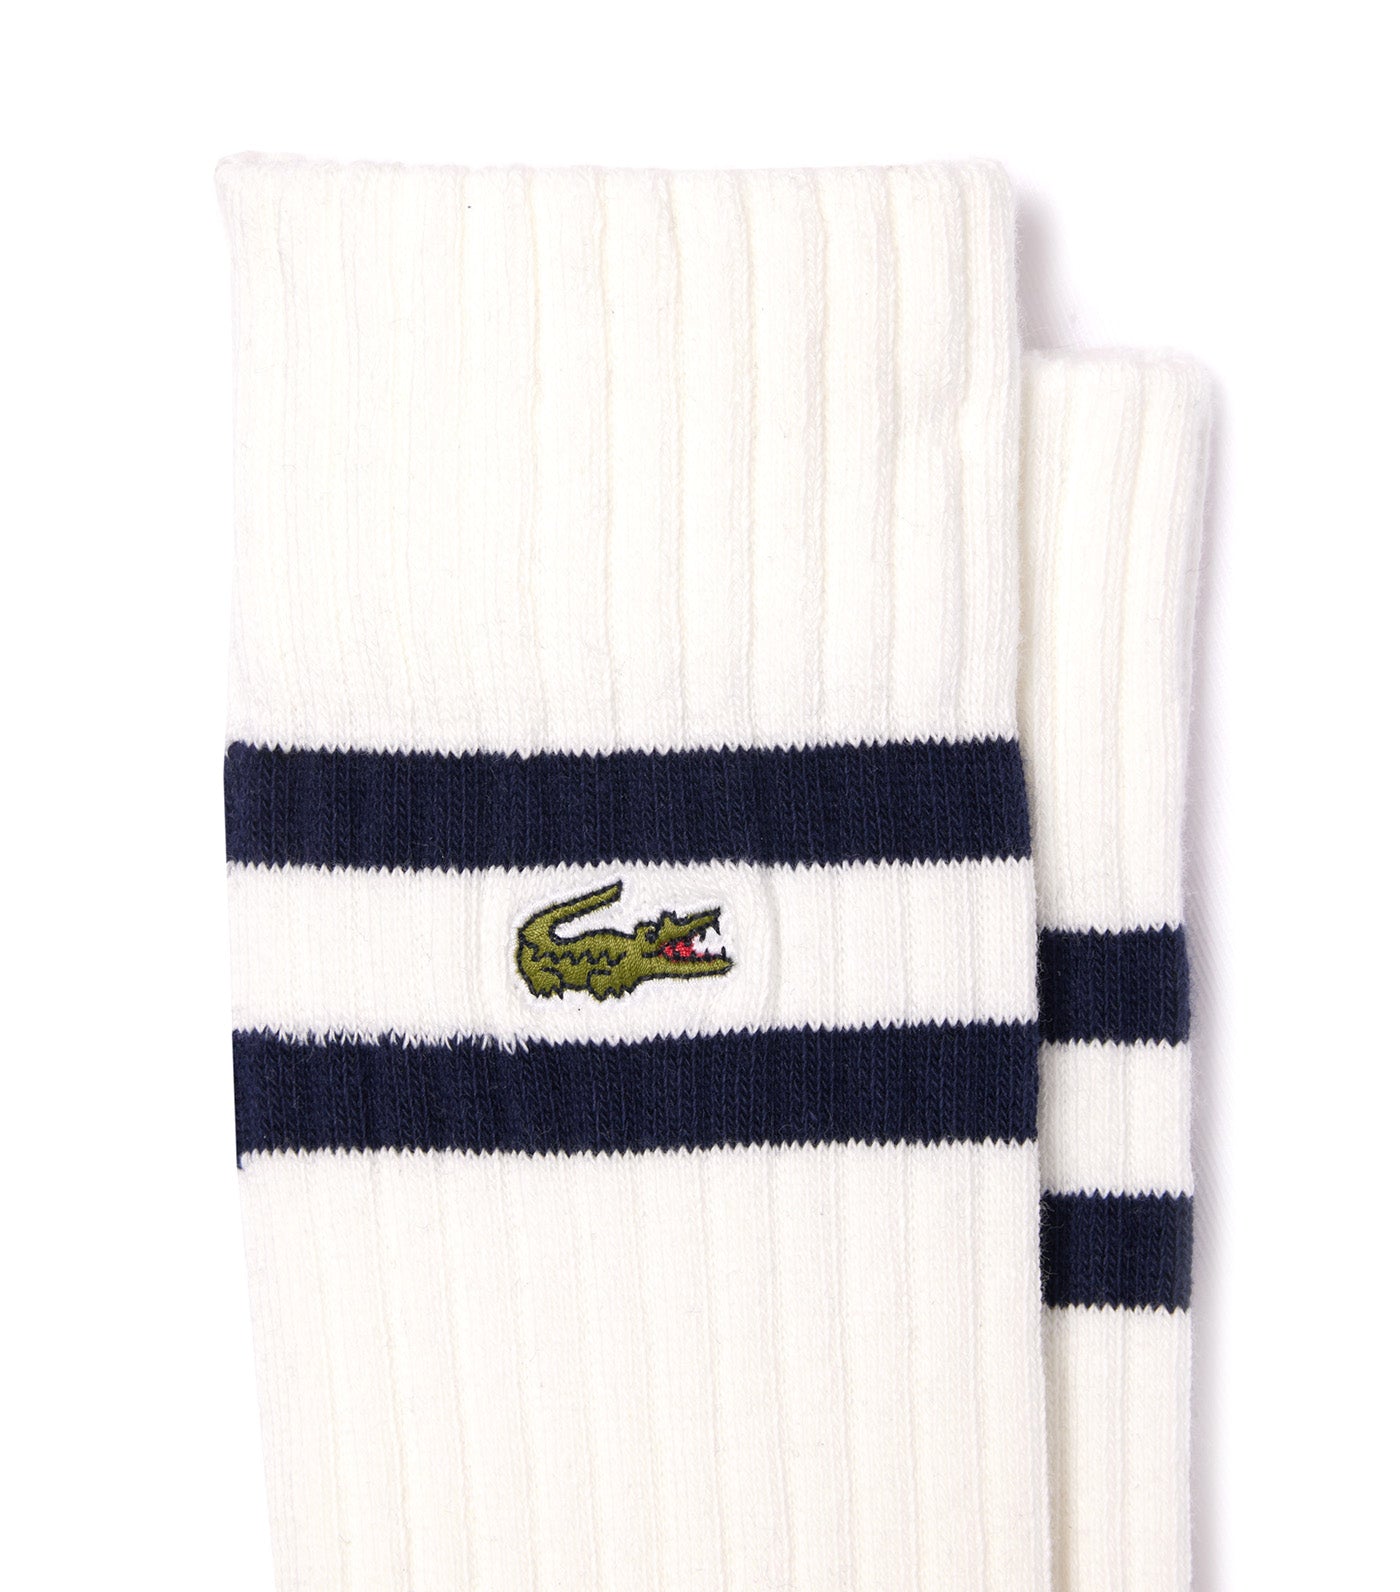 Unisex Ribbed Knit Socks With Contrast Stripes Navy Blue/Flour